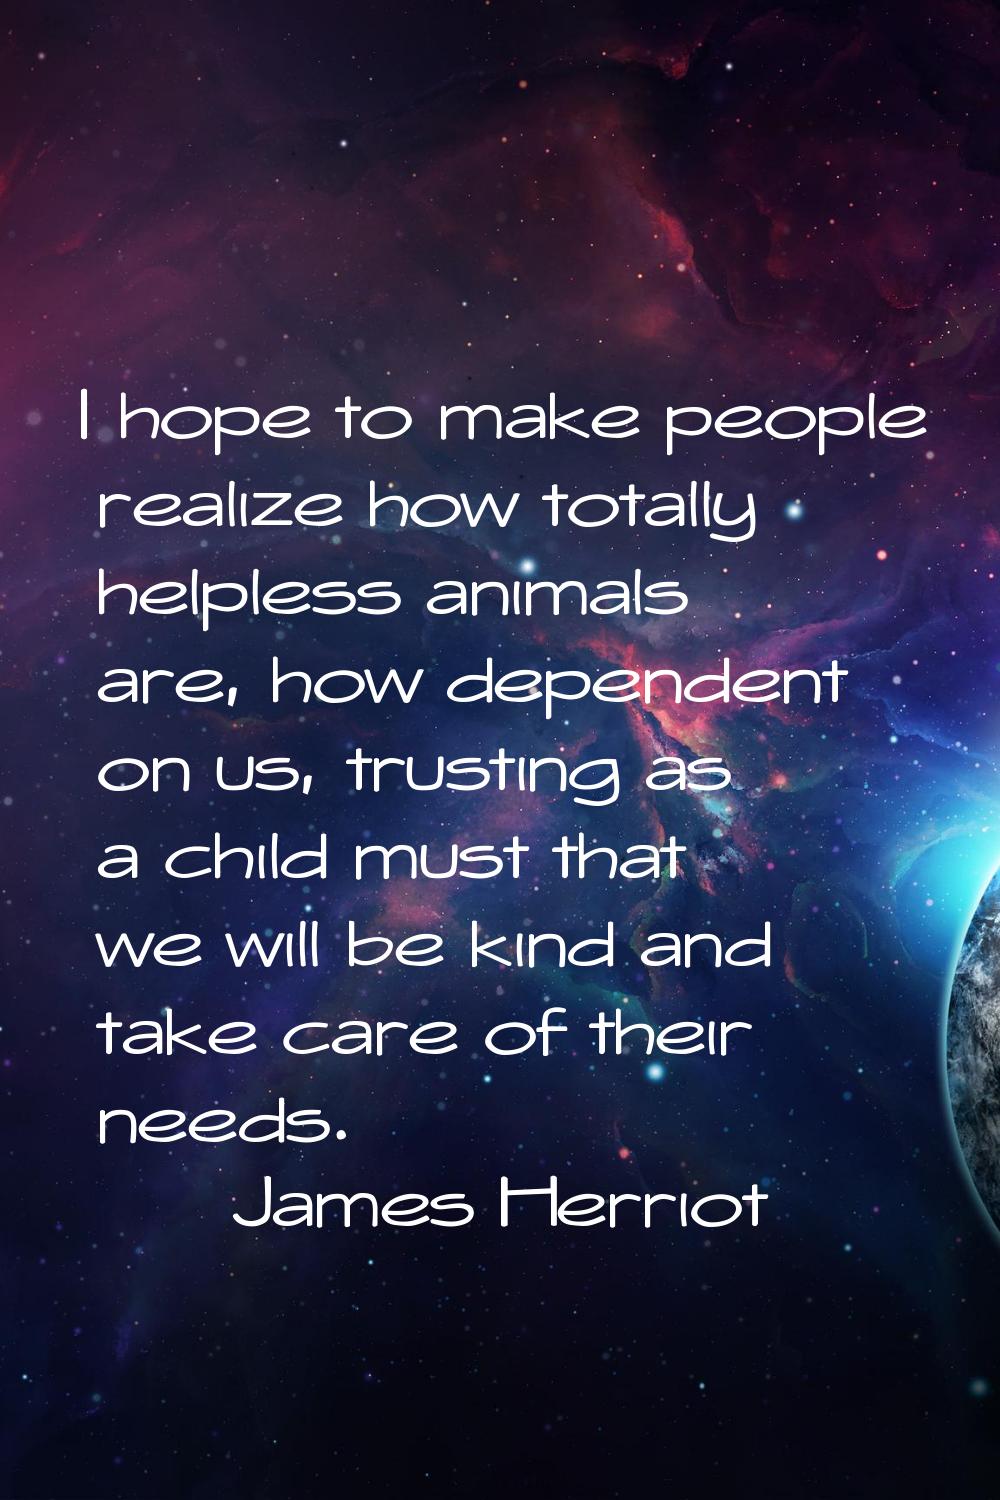 I hope to make people realize how totally helpless animals are, how dependent on us, trusting as a 